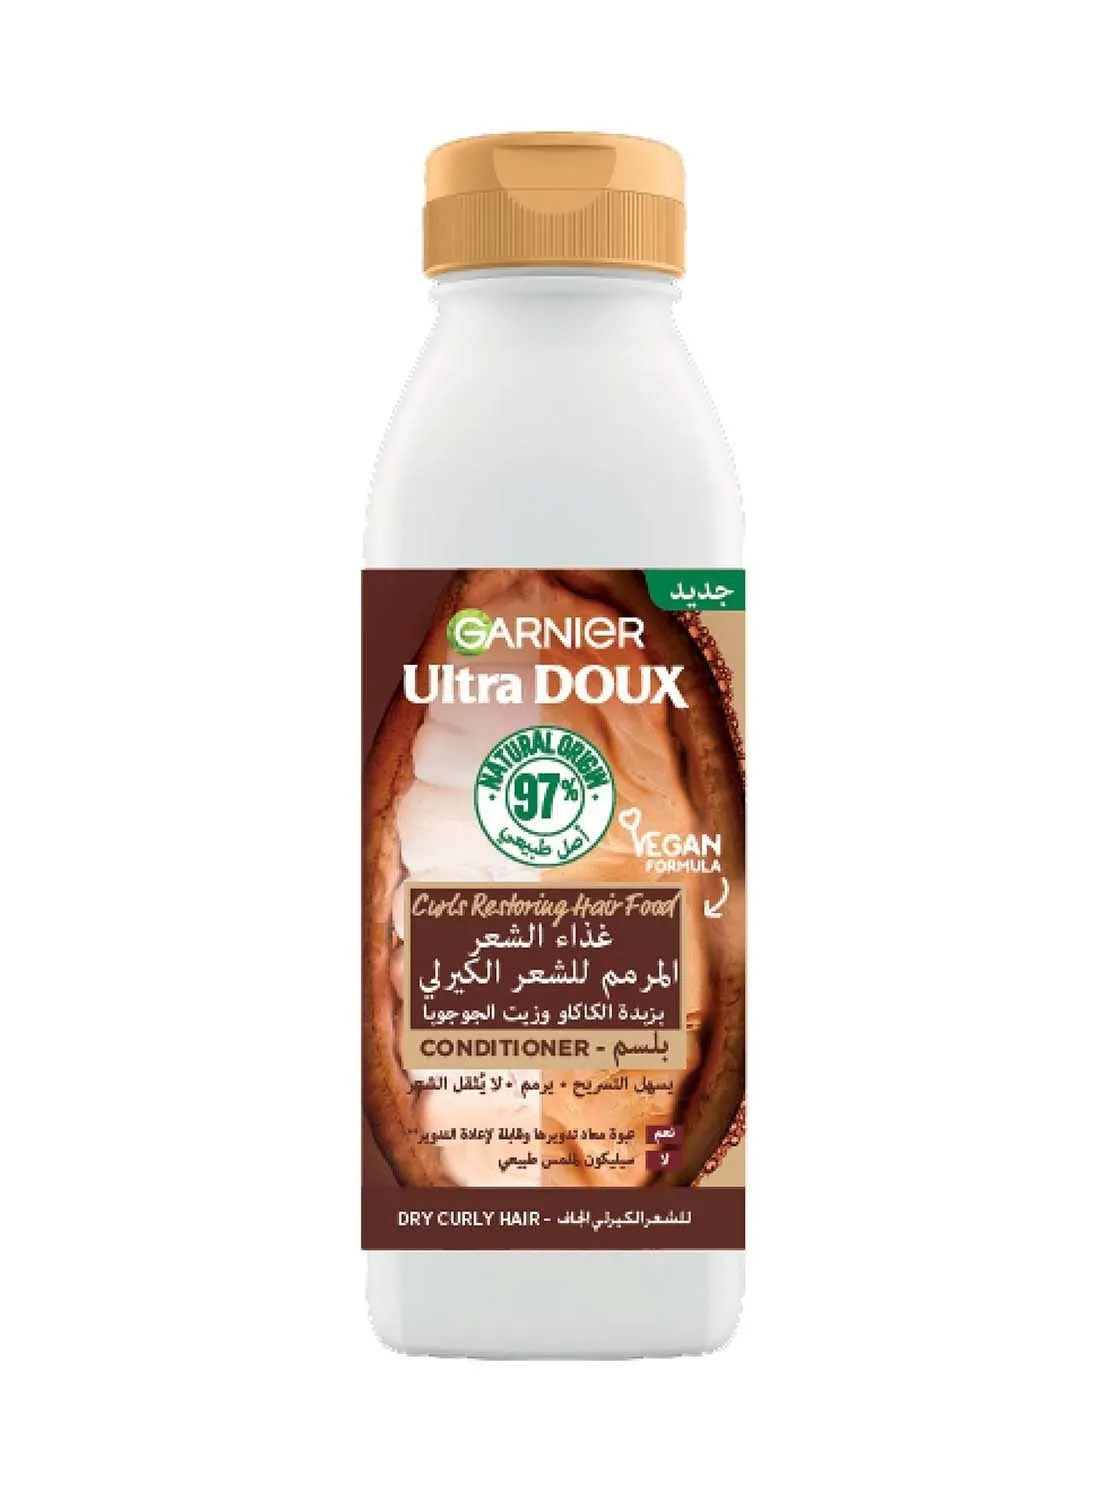 Garnier Garnier Ultra Doux Cocoa Butter Hair Food Conditioner for Dry Curly Hair 350ml